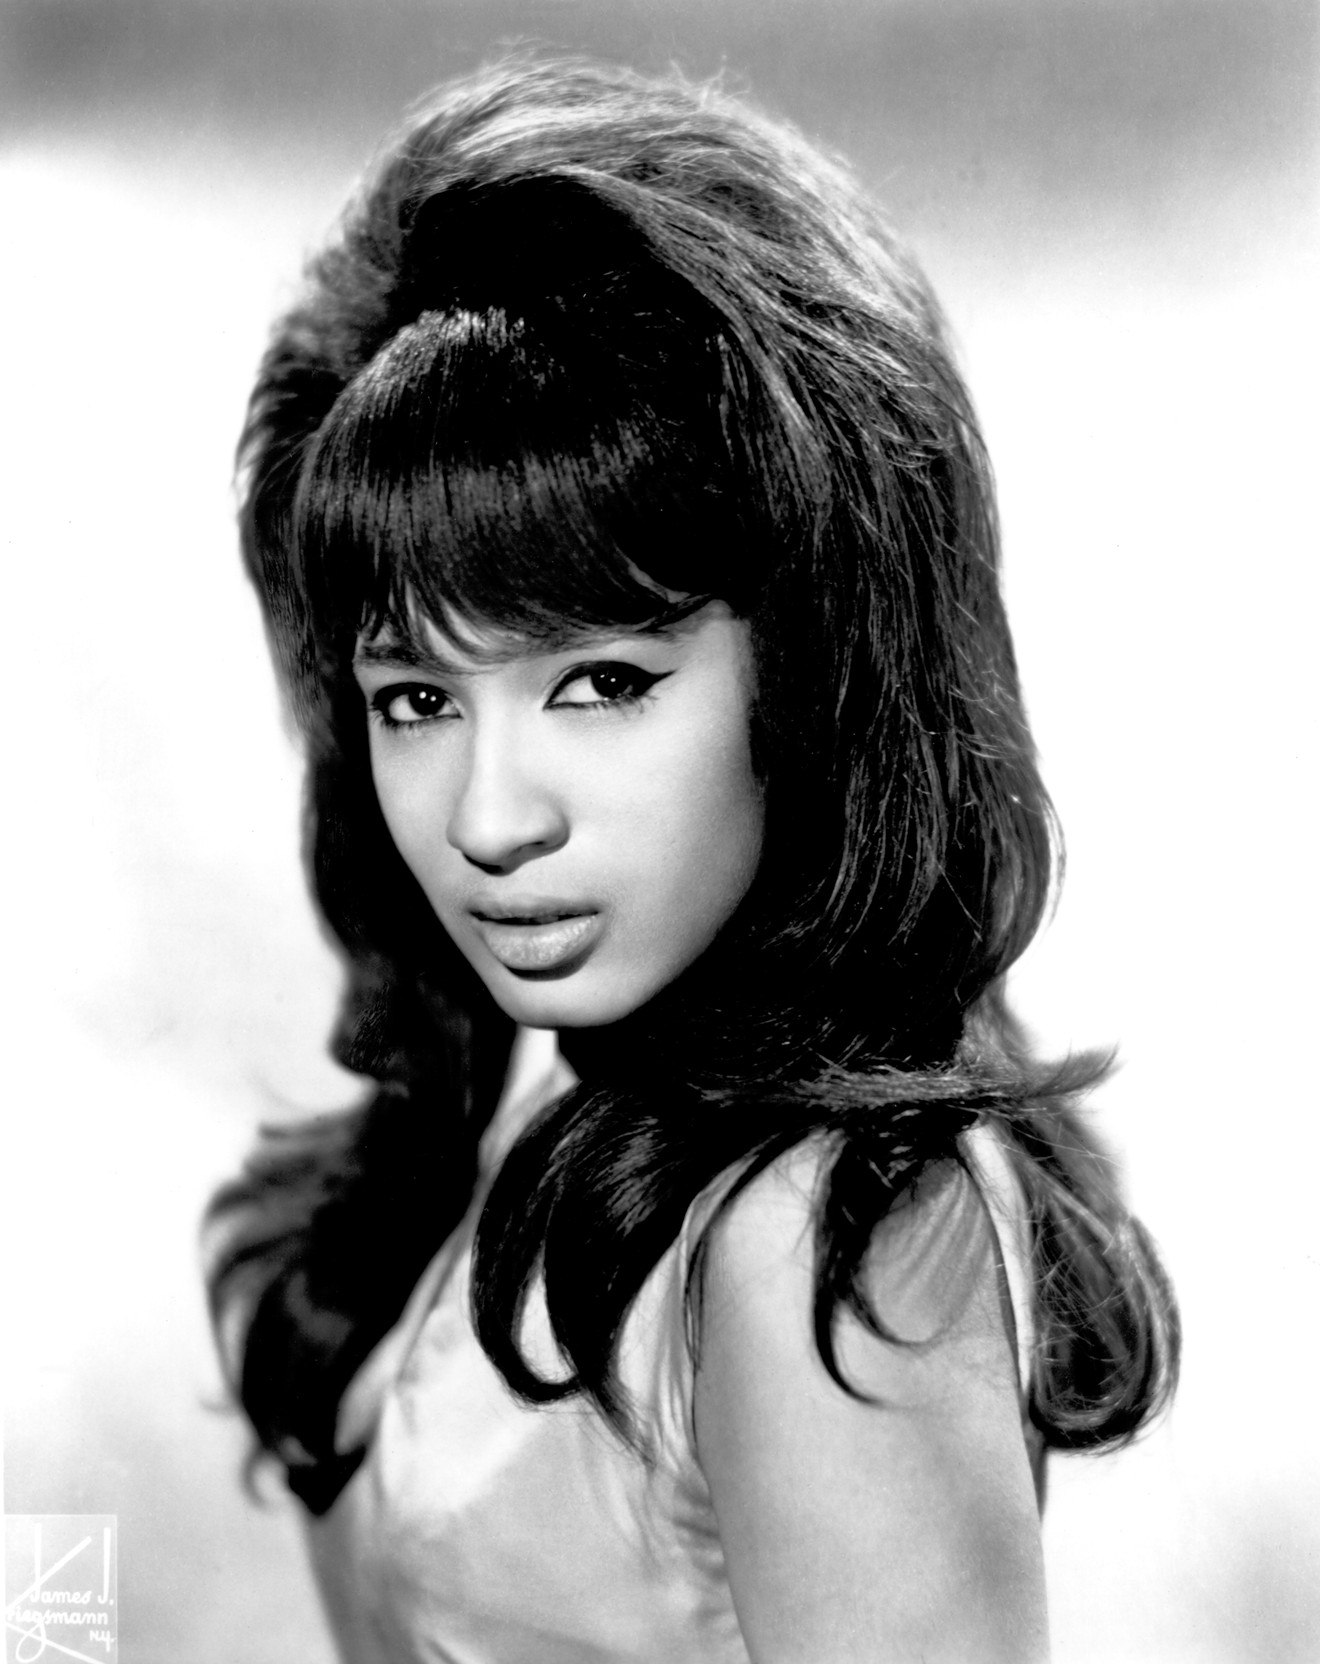 The great late Ronnie Spector left behind a treasure trove of recorded performances.